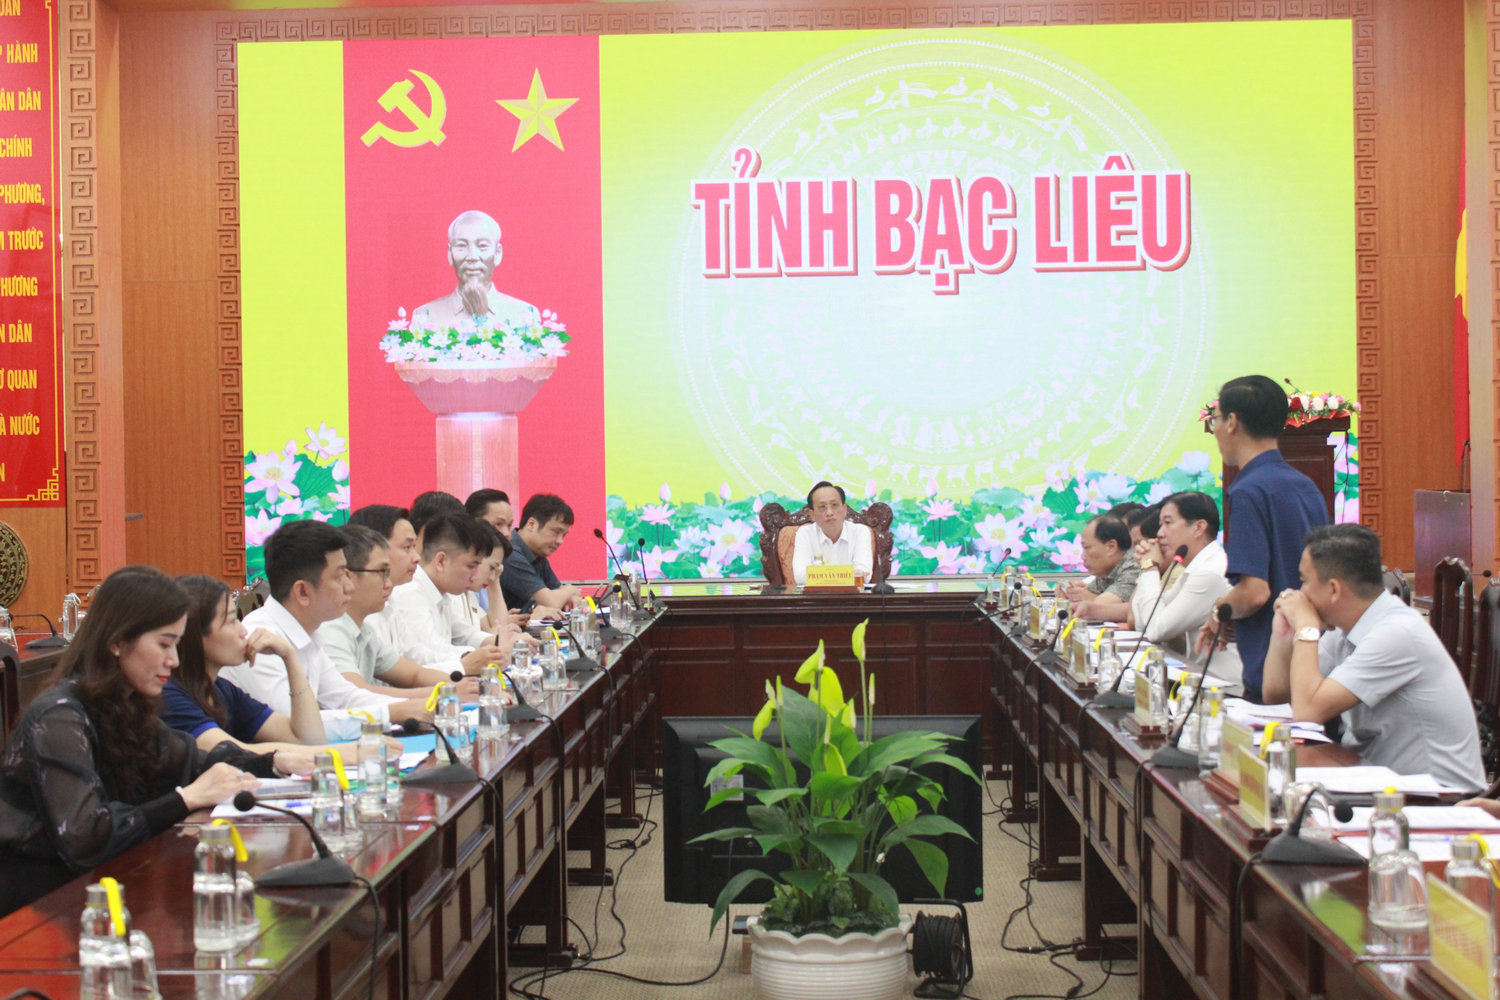 The meeting between FPT Corporation and local leaders